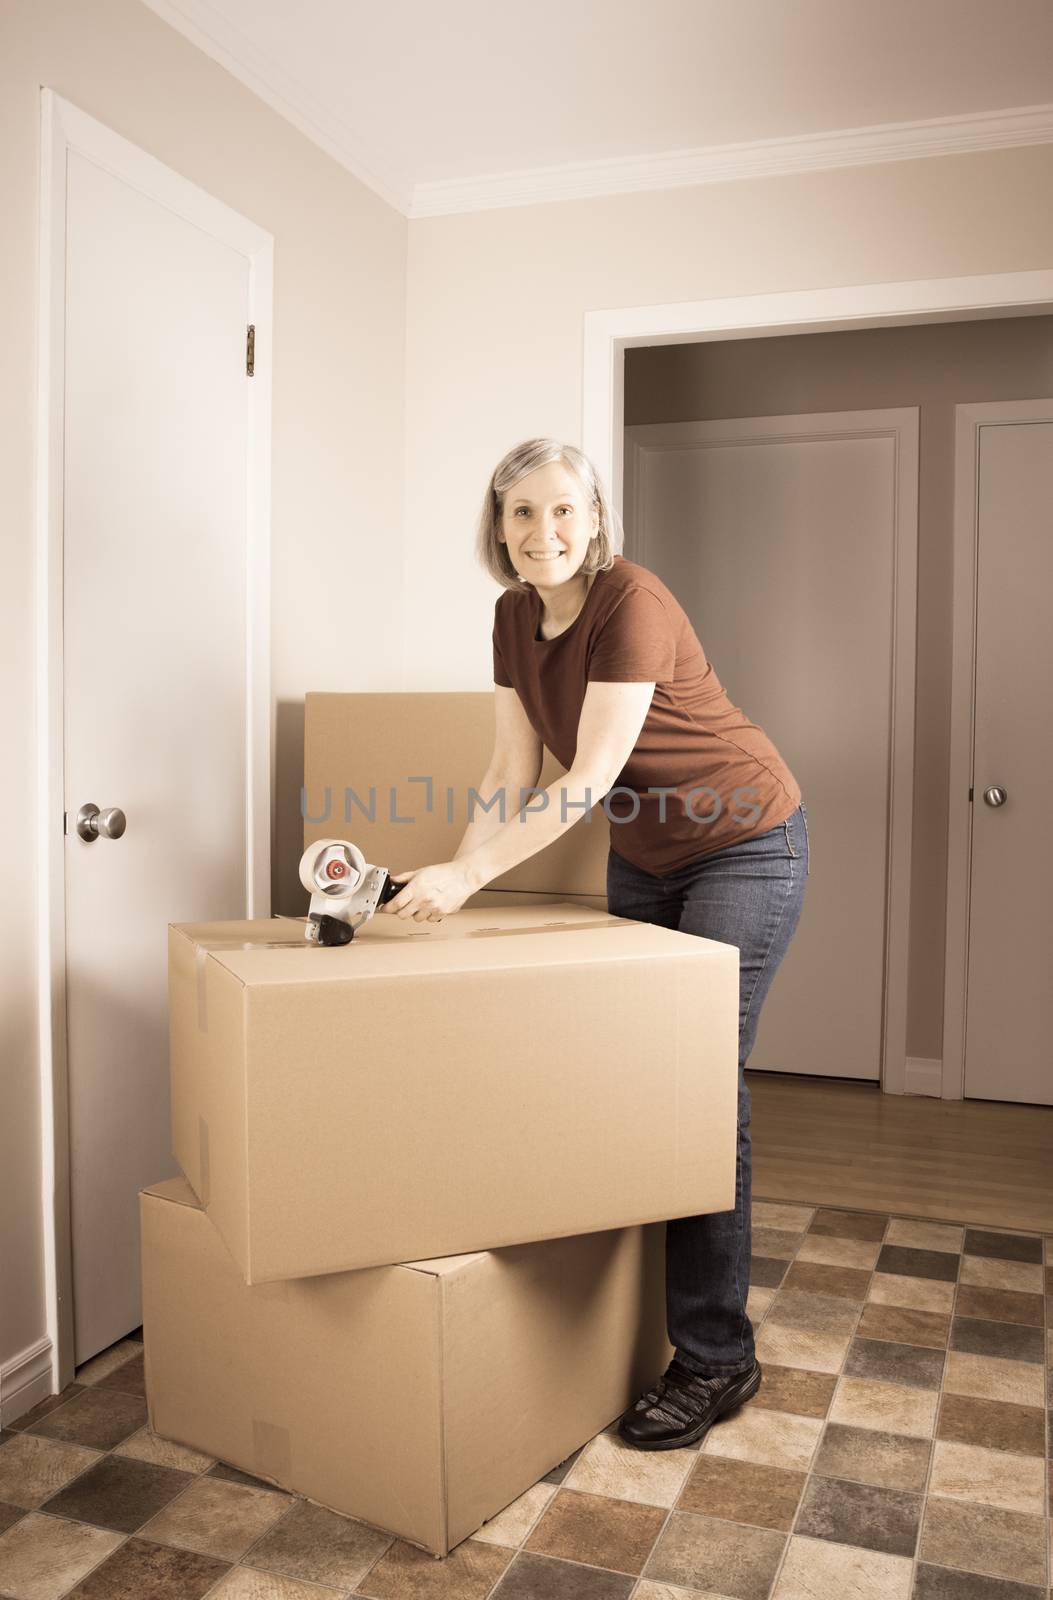 Mature woman closing boxes with tape by lanalanglois